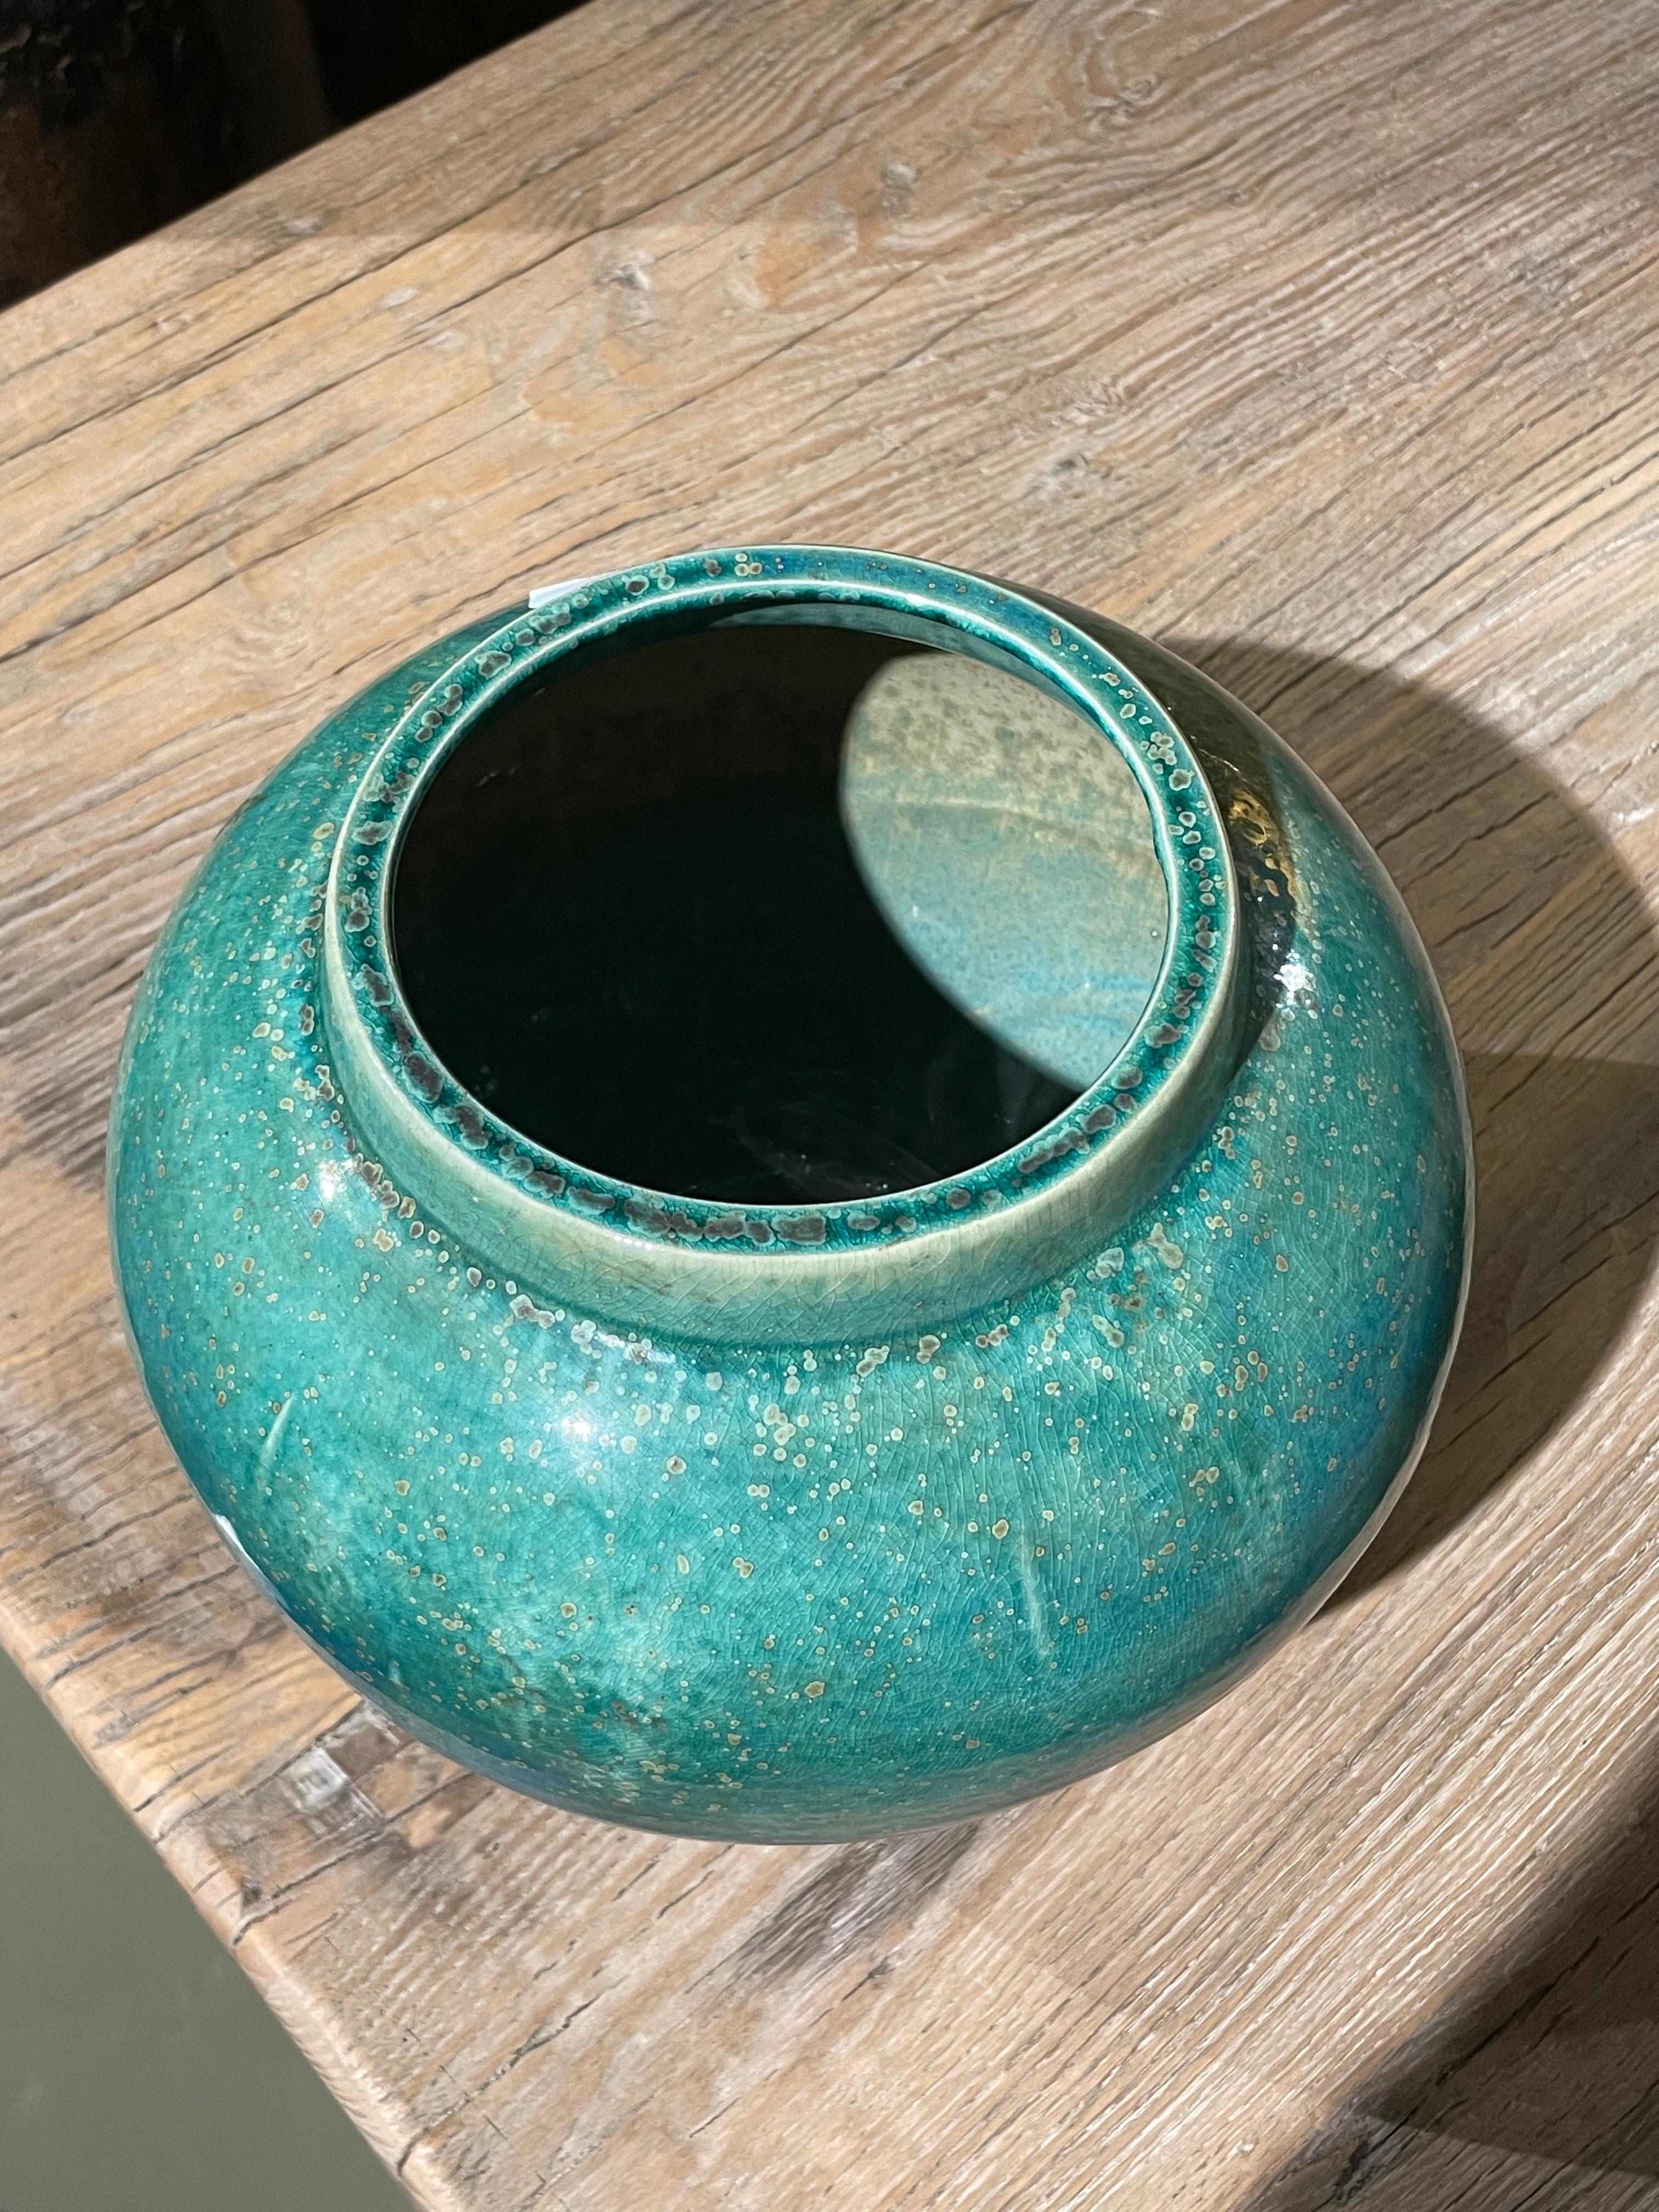 Contemporary Chinese mottled turquoise coloring with crackle glaze vase.
Classic simple shaped pot.
From a large collection of different sizes and shapes.

